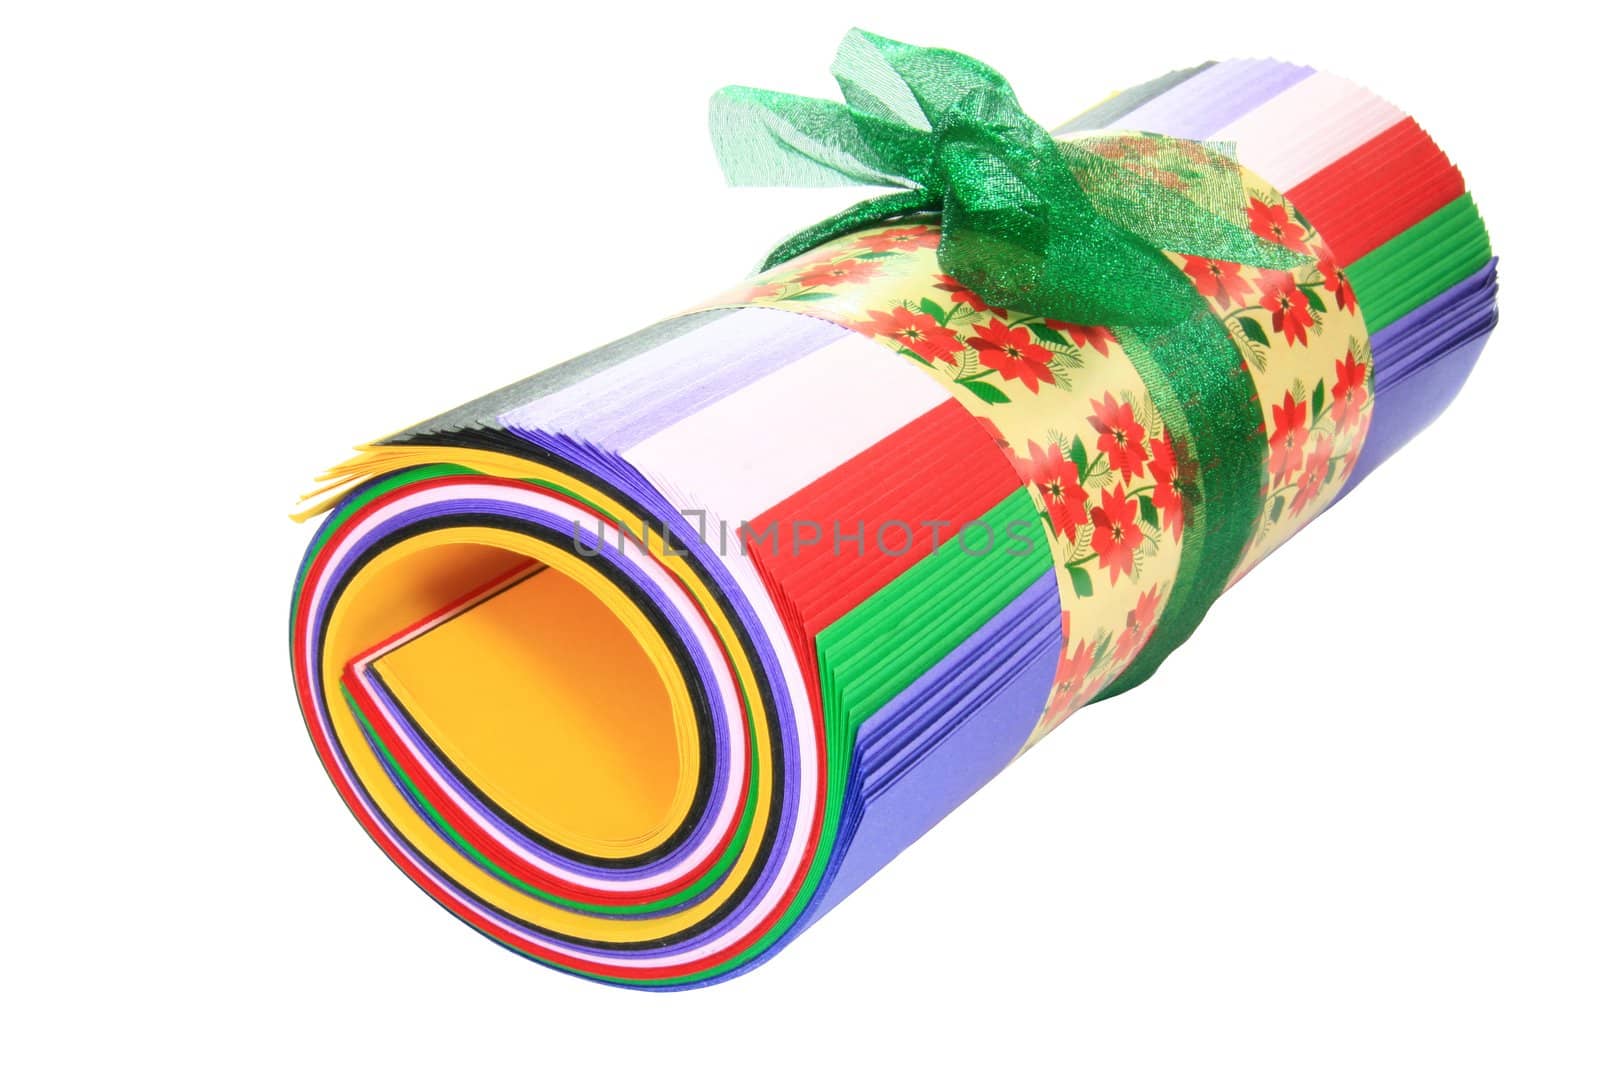 colored roll of paper  by jonasbsl